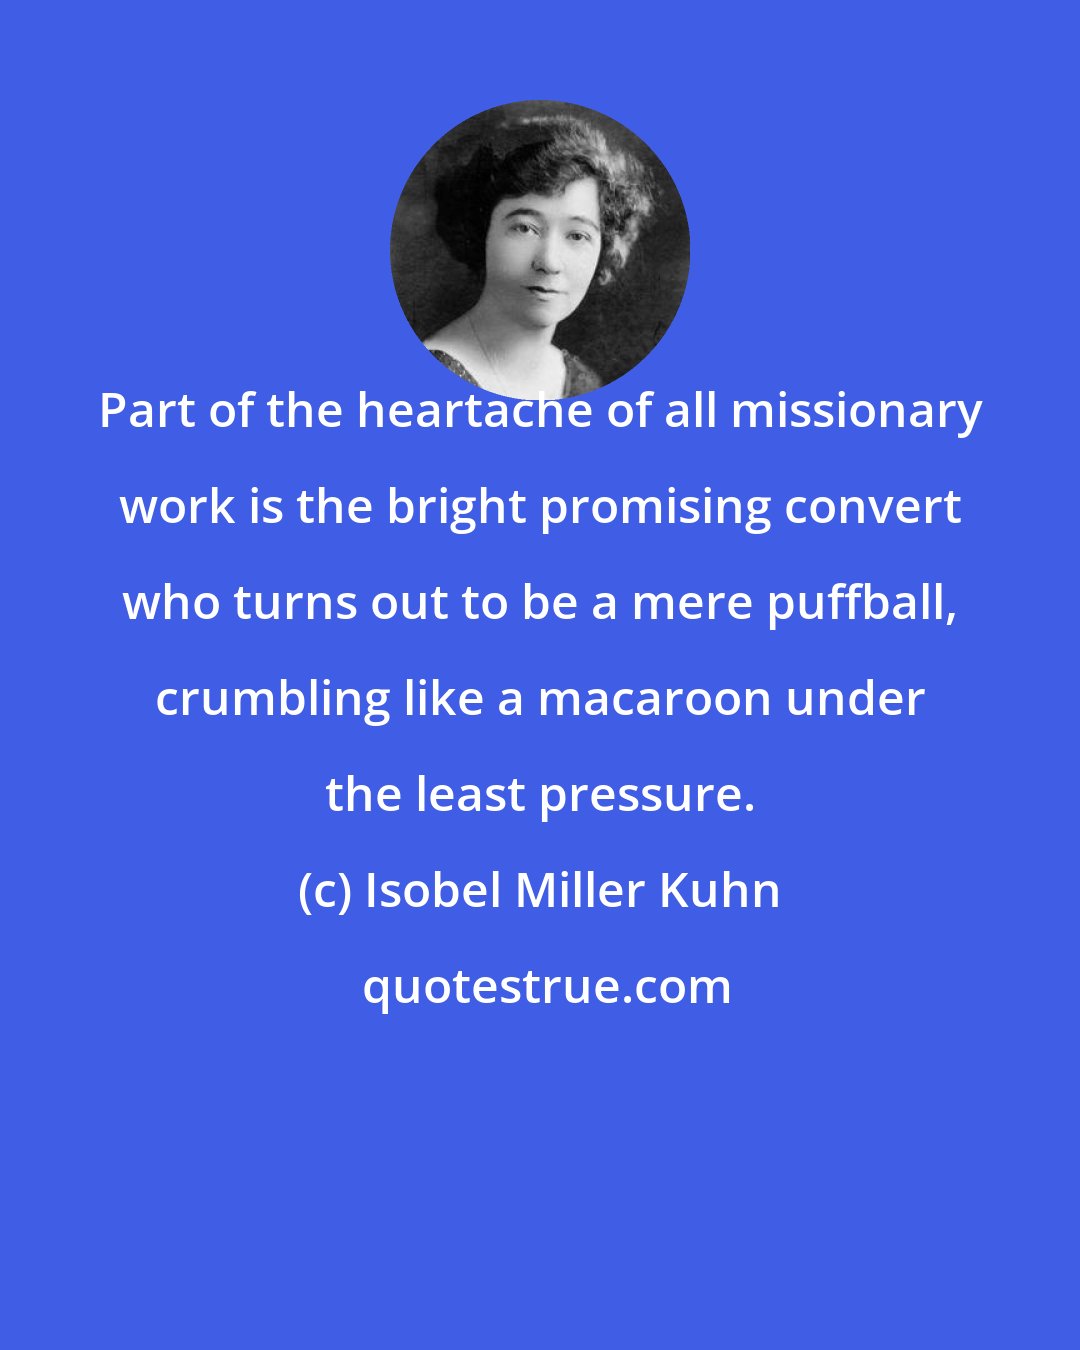 Isobel Miller Kuhn: Part of the heartache of all missionary work is the bright promising convert who turns out to be a mere puffball, crumbling like a macaroon under the least pressure.